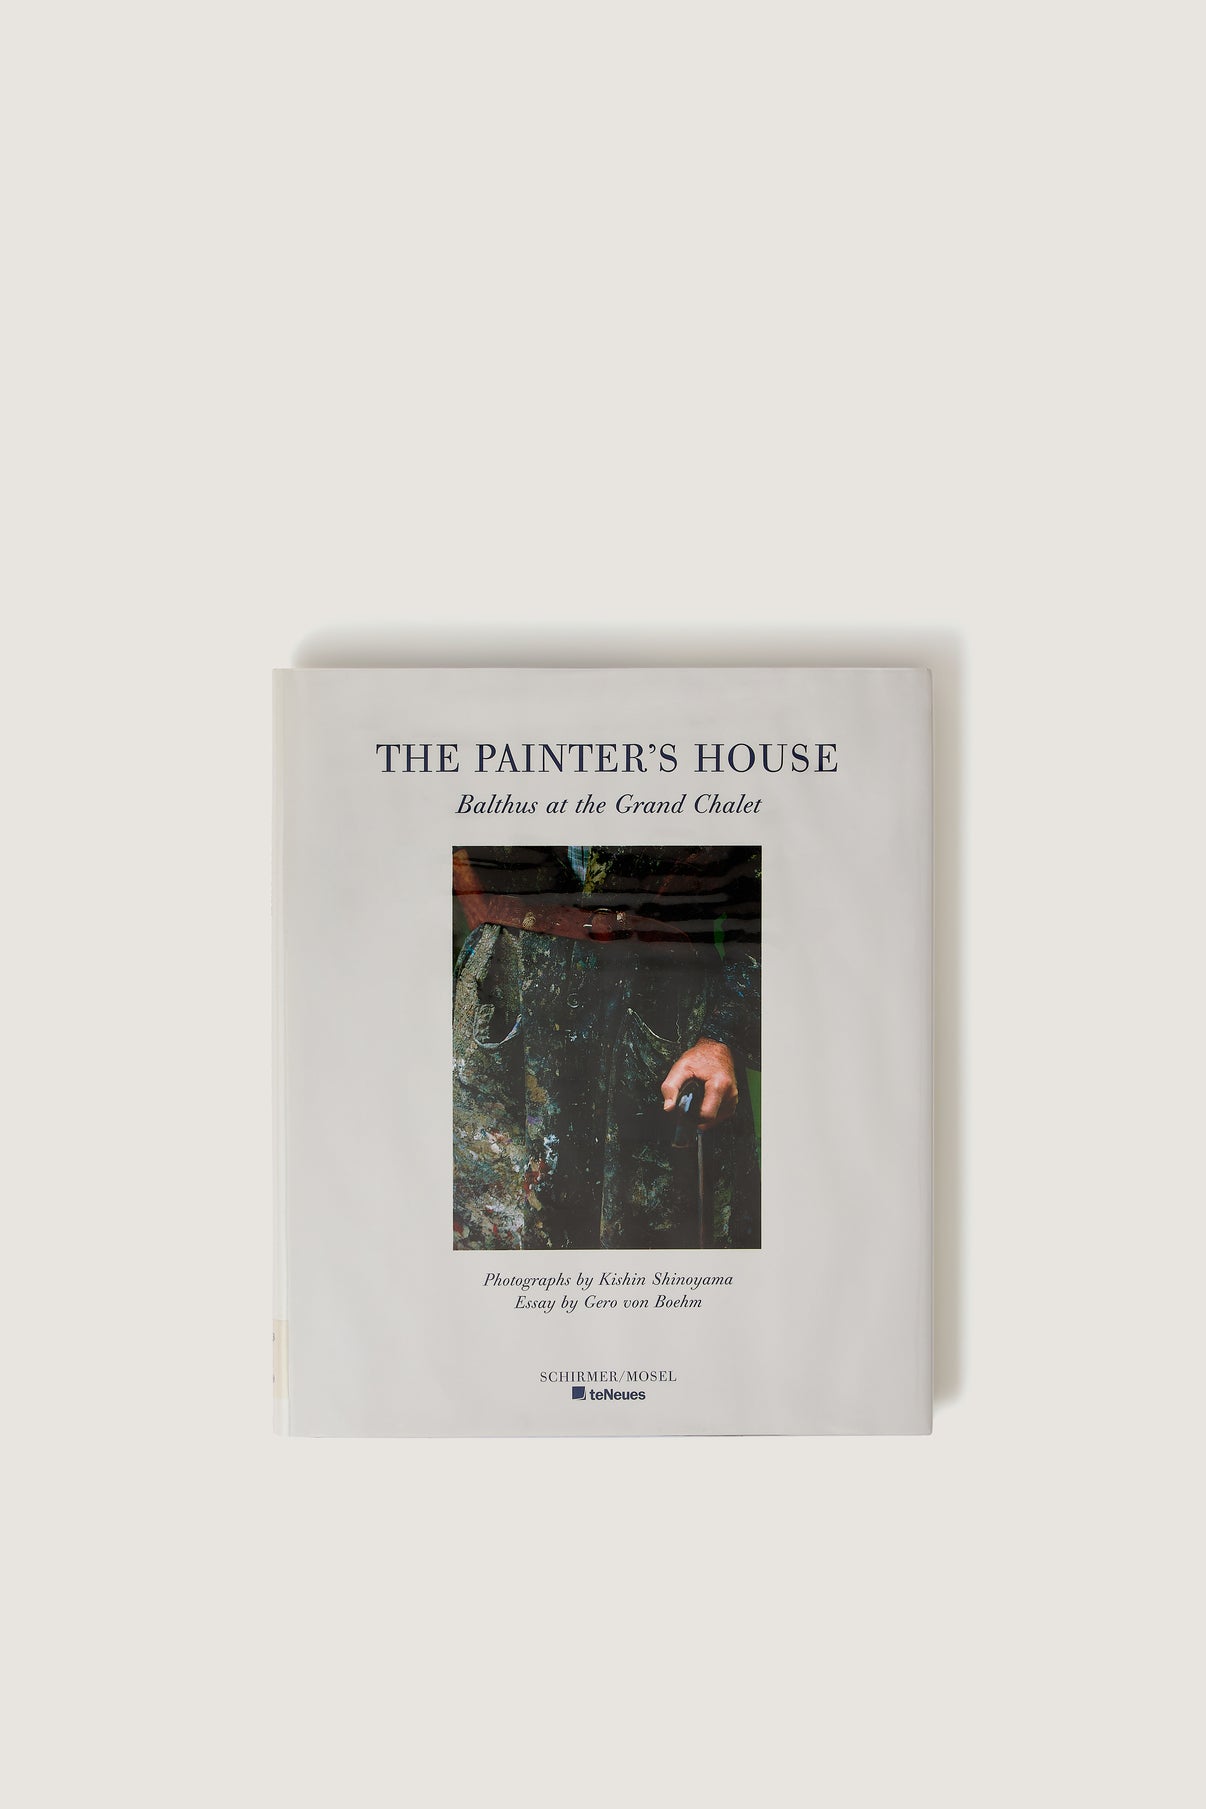 LIVRE "THE PAINTER'S HOUSE : BALTHUS AT THE GRAND CHALET" vue 1